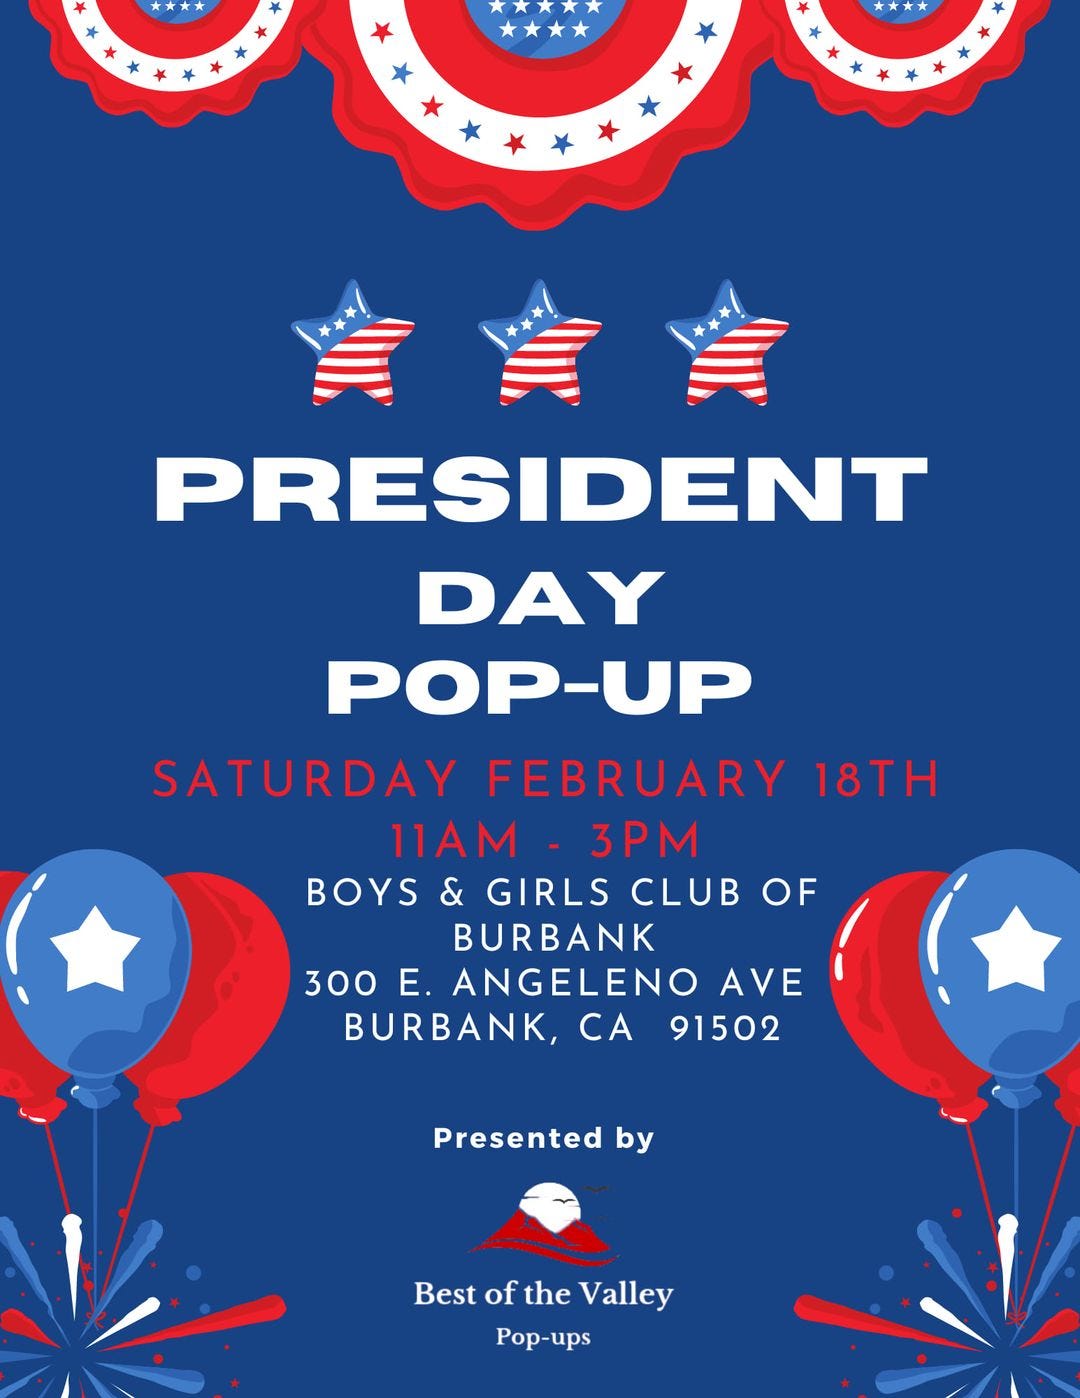 May be an image of text that says 'PRESIDENT DAY POP-UP SATURDAY FEBRUARY 18TH 11AM 3PM BOYS & GIRLS CLUB OF BURBANK 300 E. ANGELENO AVE BURBANK, ca 91502 Presented by Best of the Valley Pop-ups'